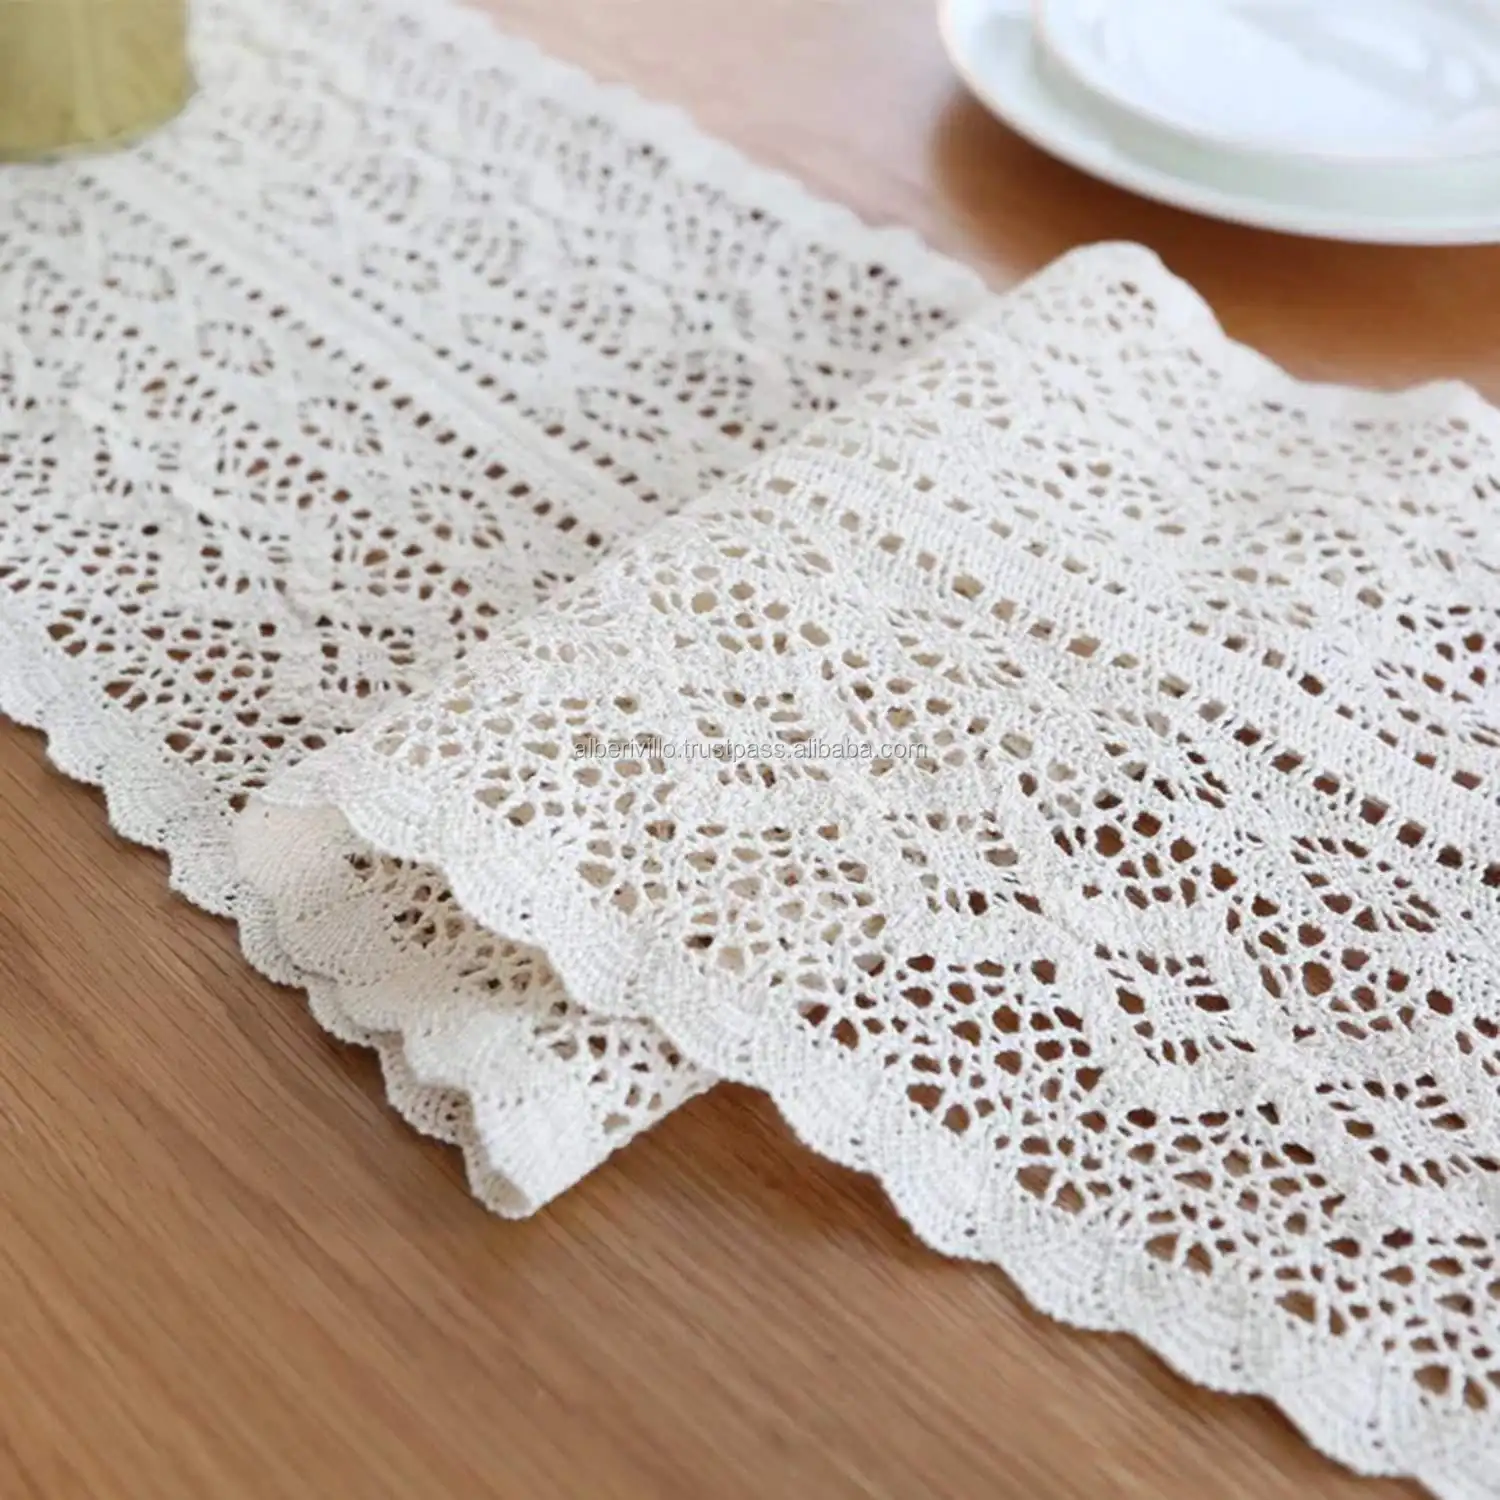 High Quality Customized Home Eco Friendly Cotton Cord Macrame Crochet Runner Handmade Mats from India